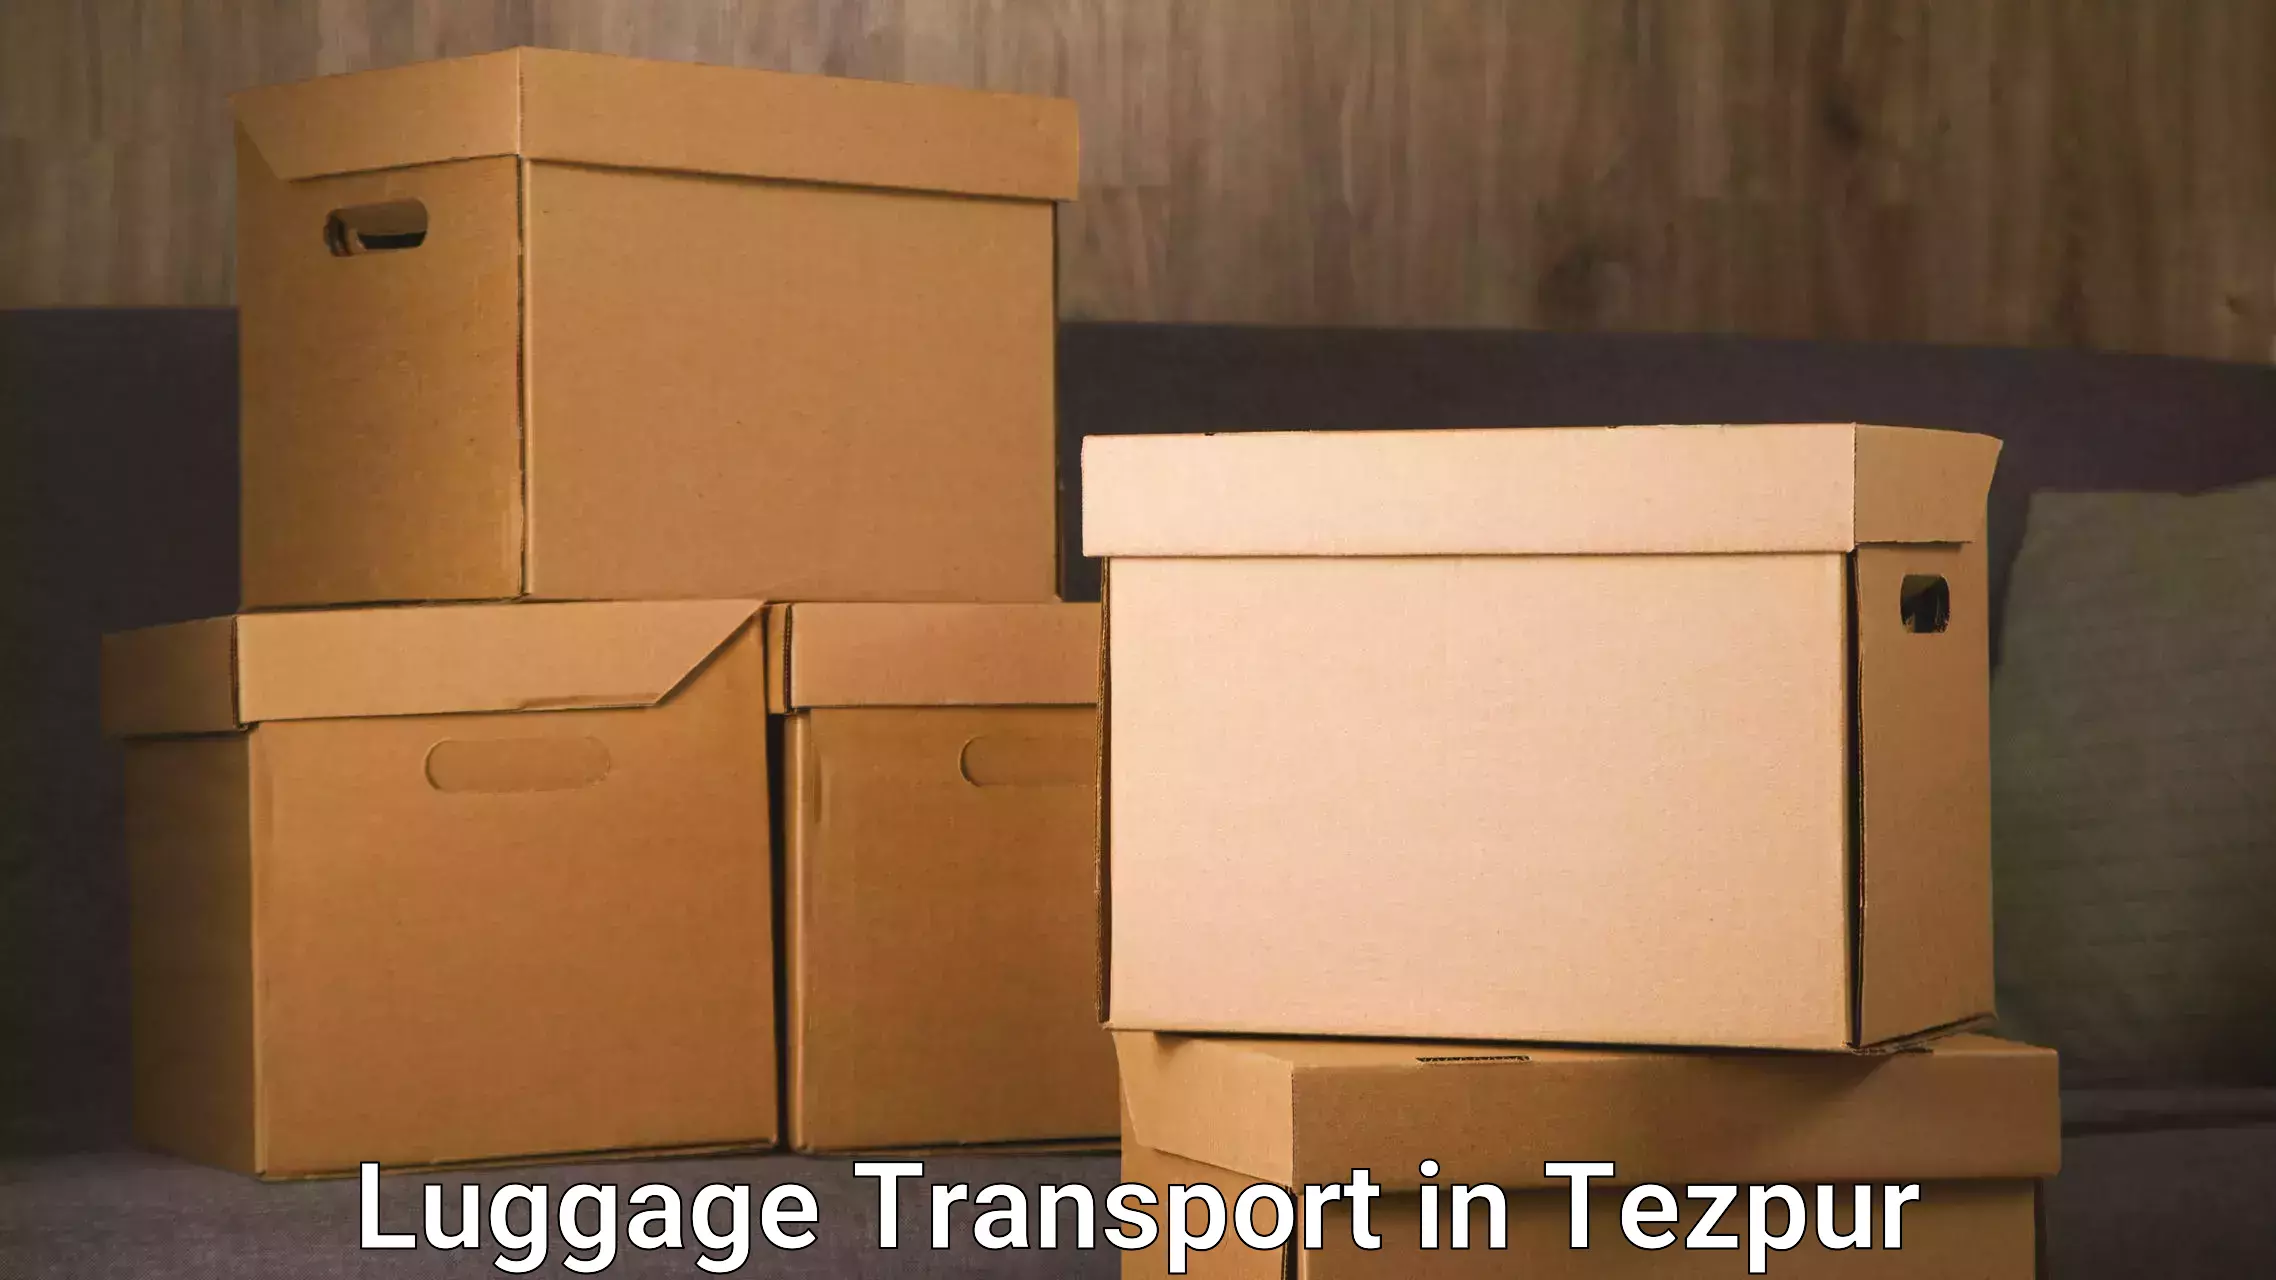 Luggage delivery operations in Tezpur